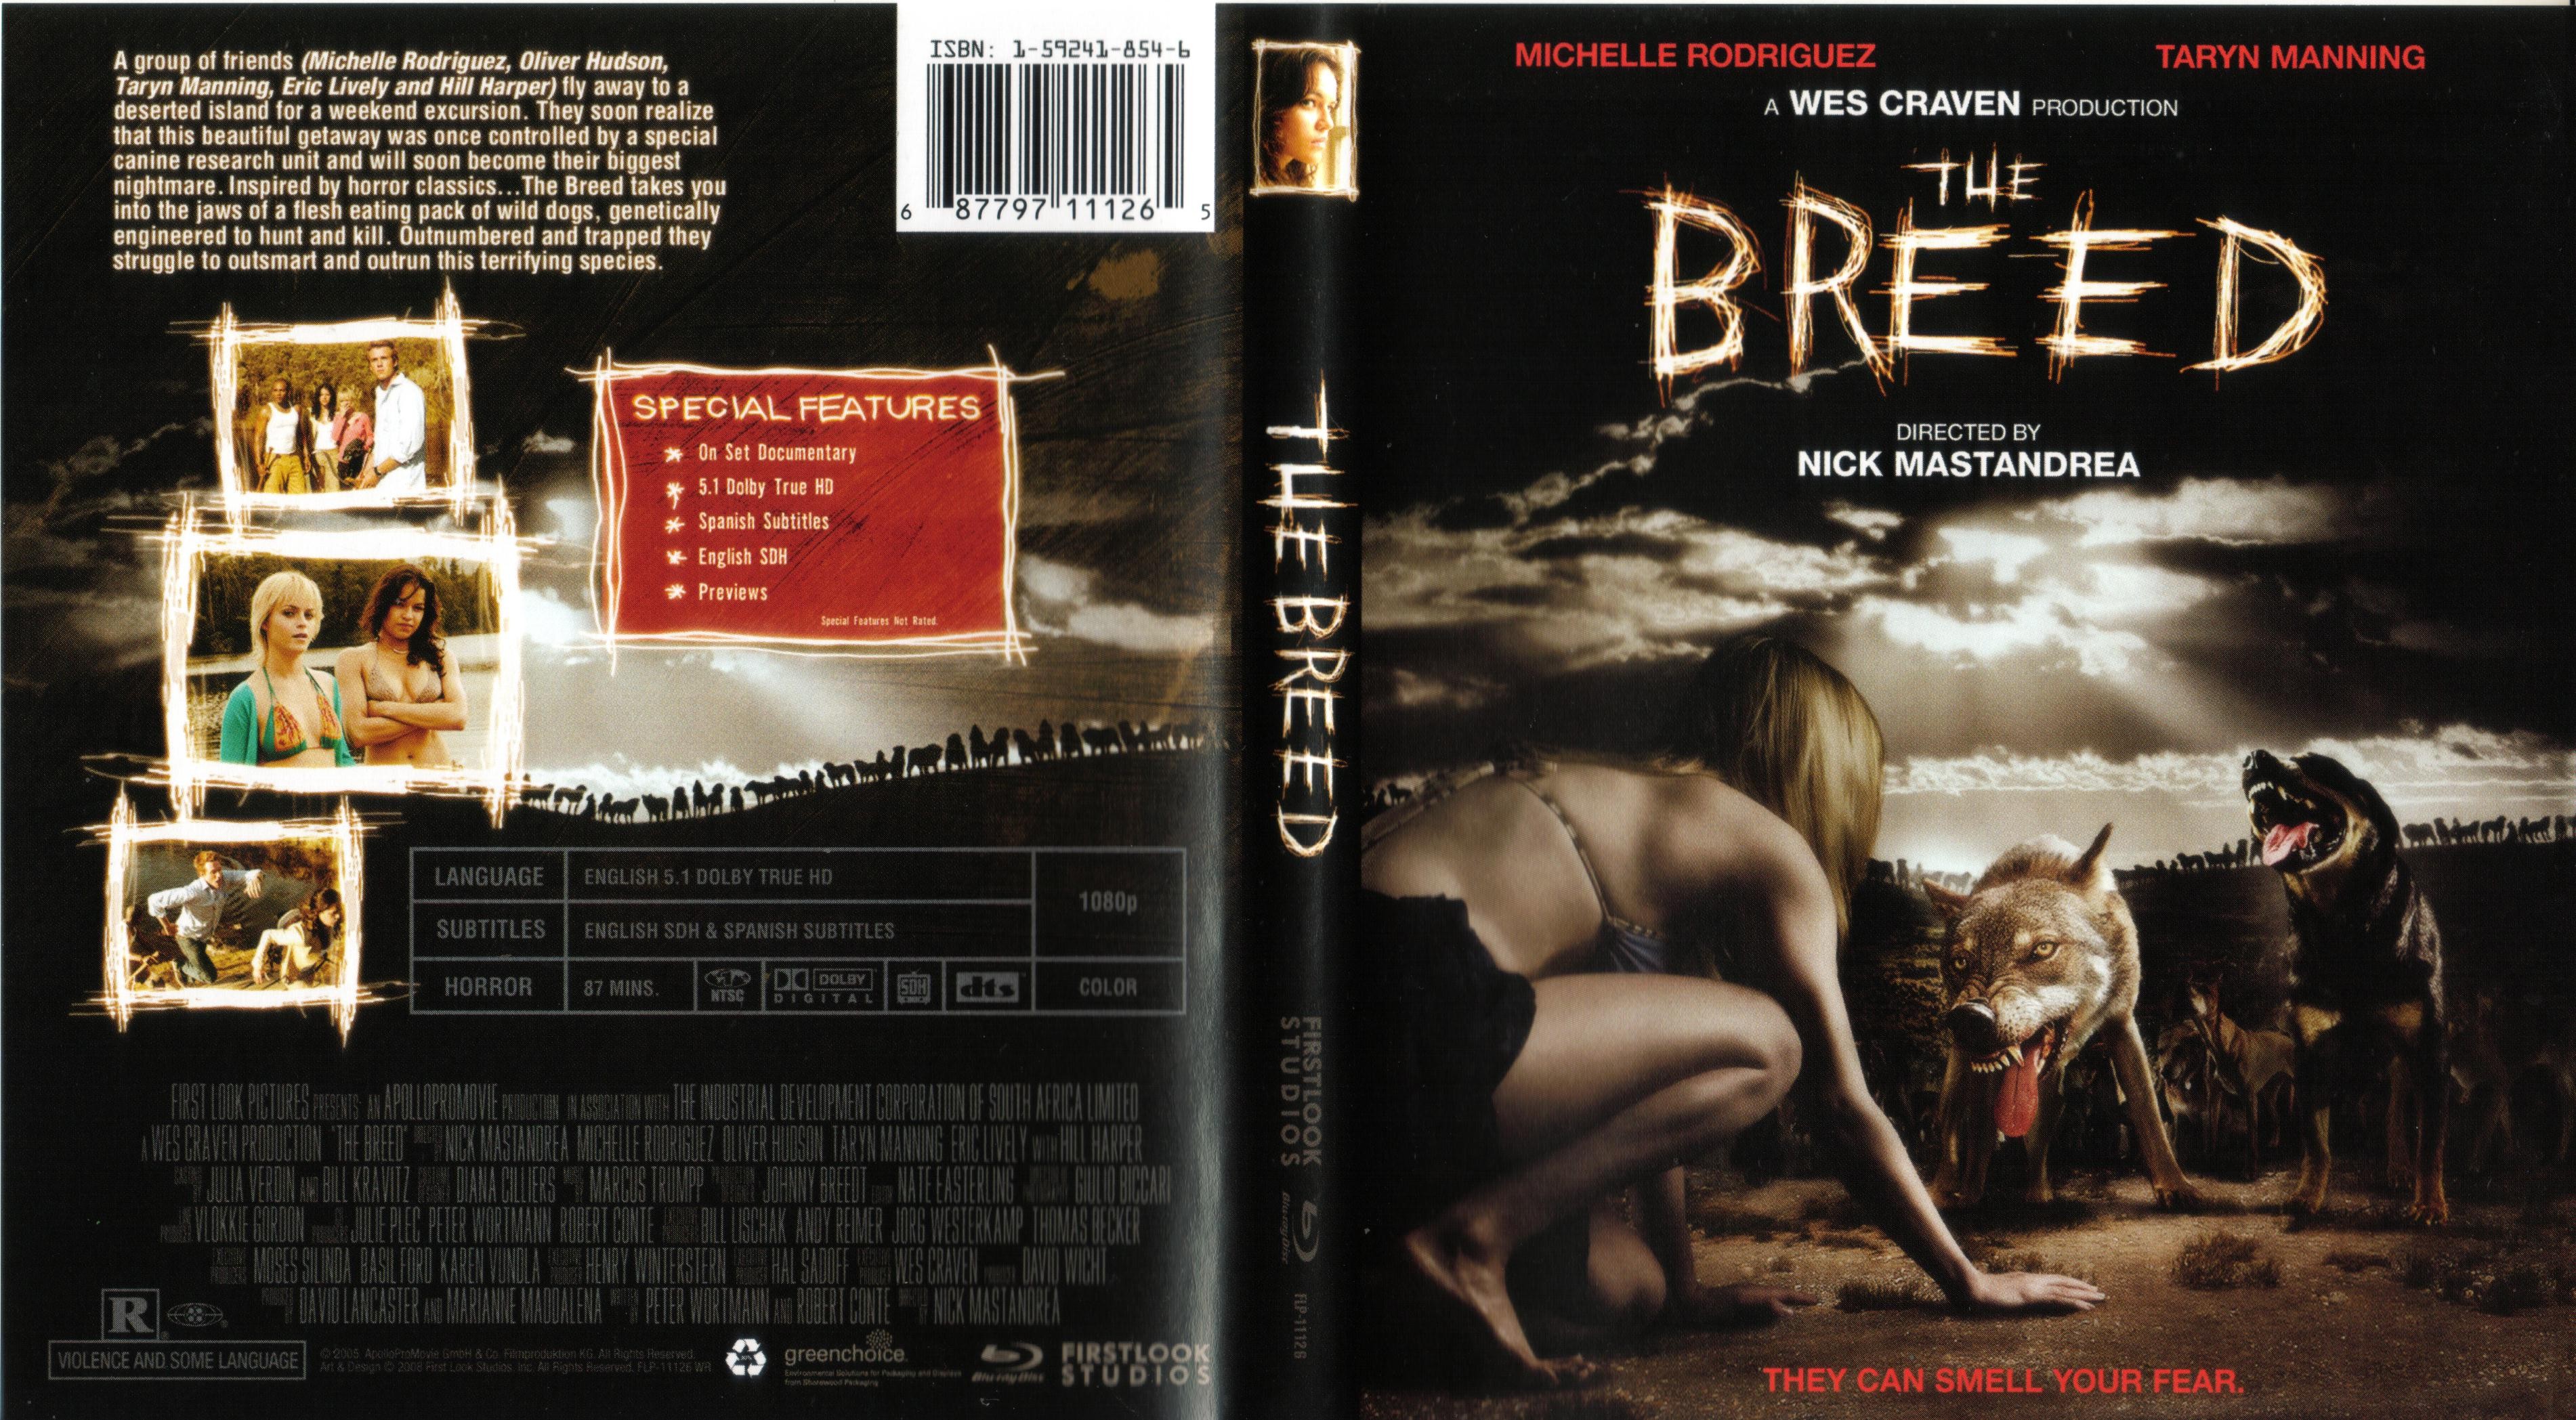 Jaquette DVD The breed (Michelle Rodriguez) Zone 1 (BLU-RAY)